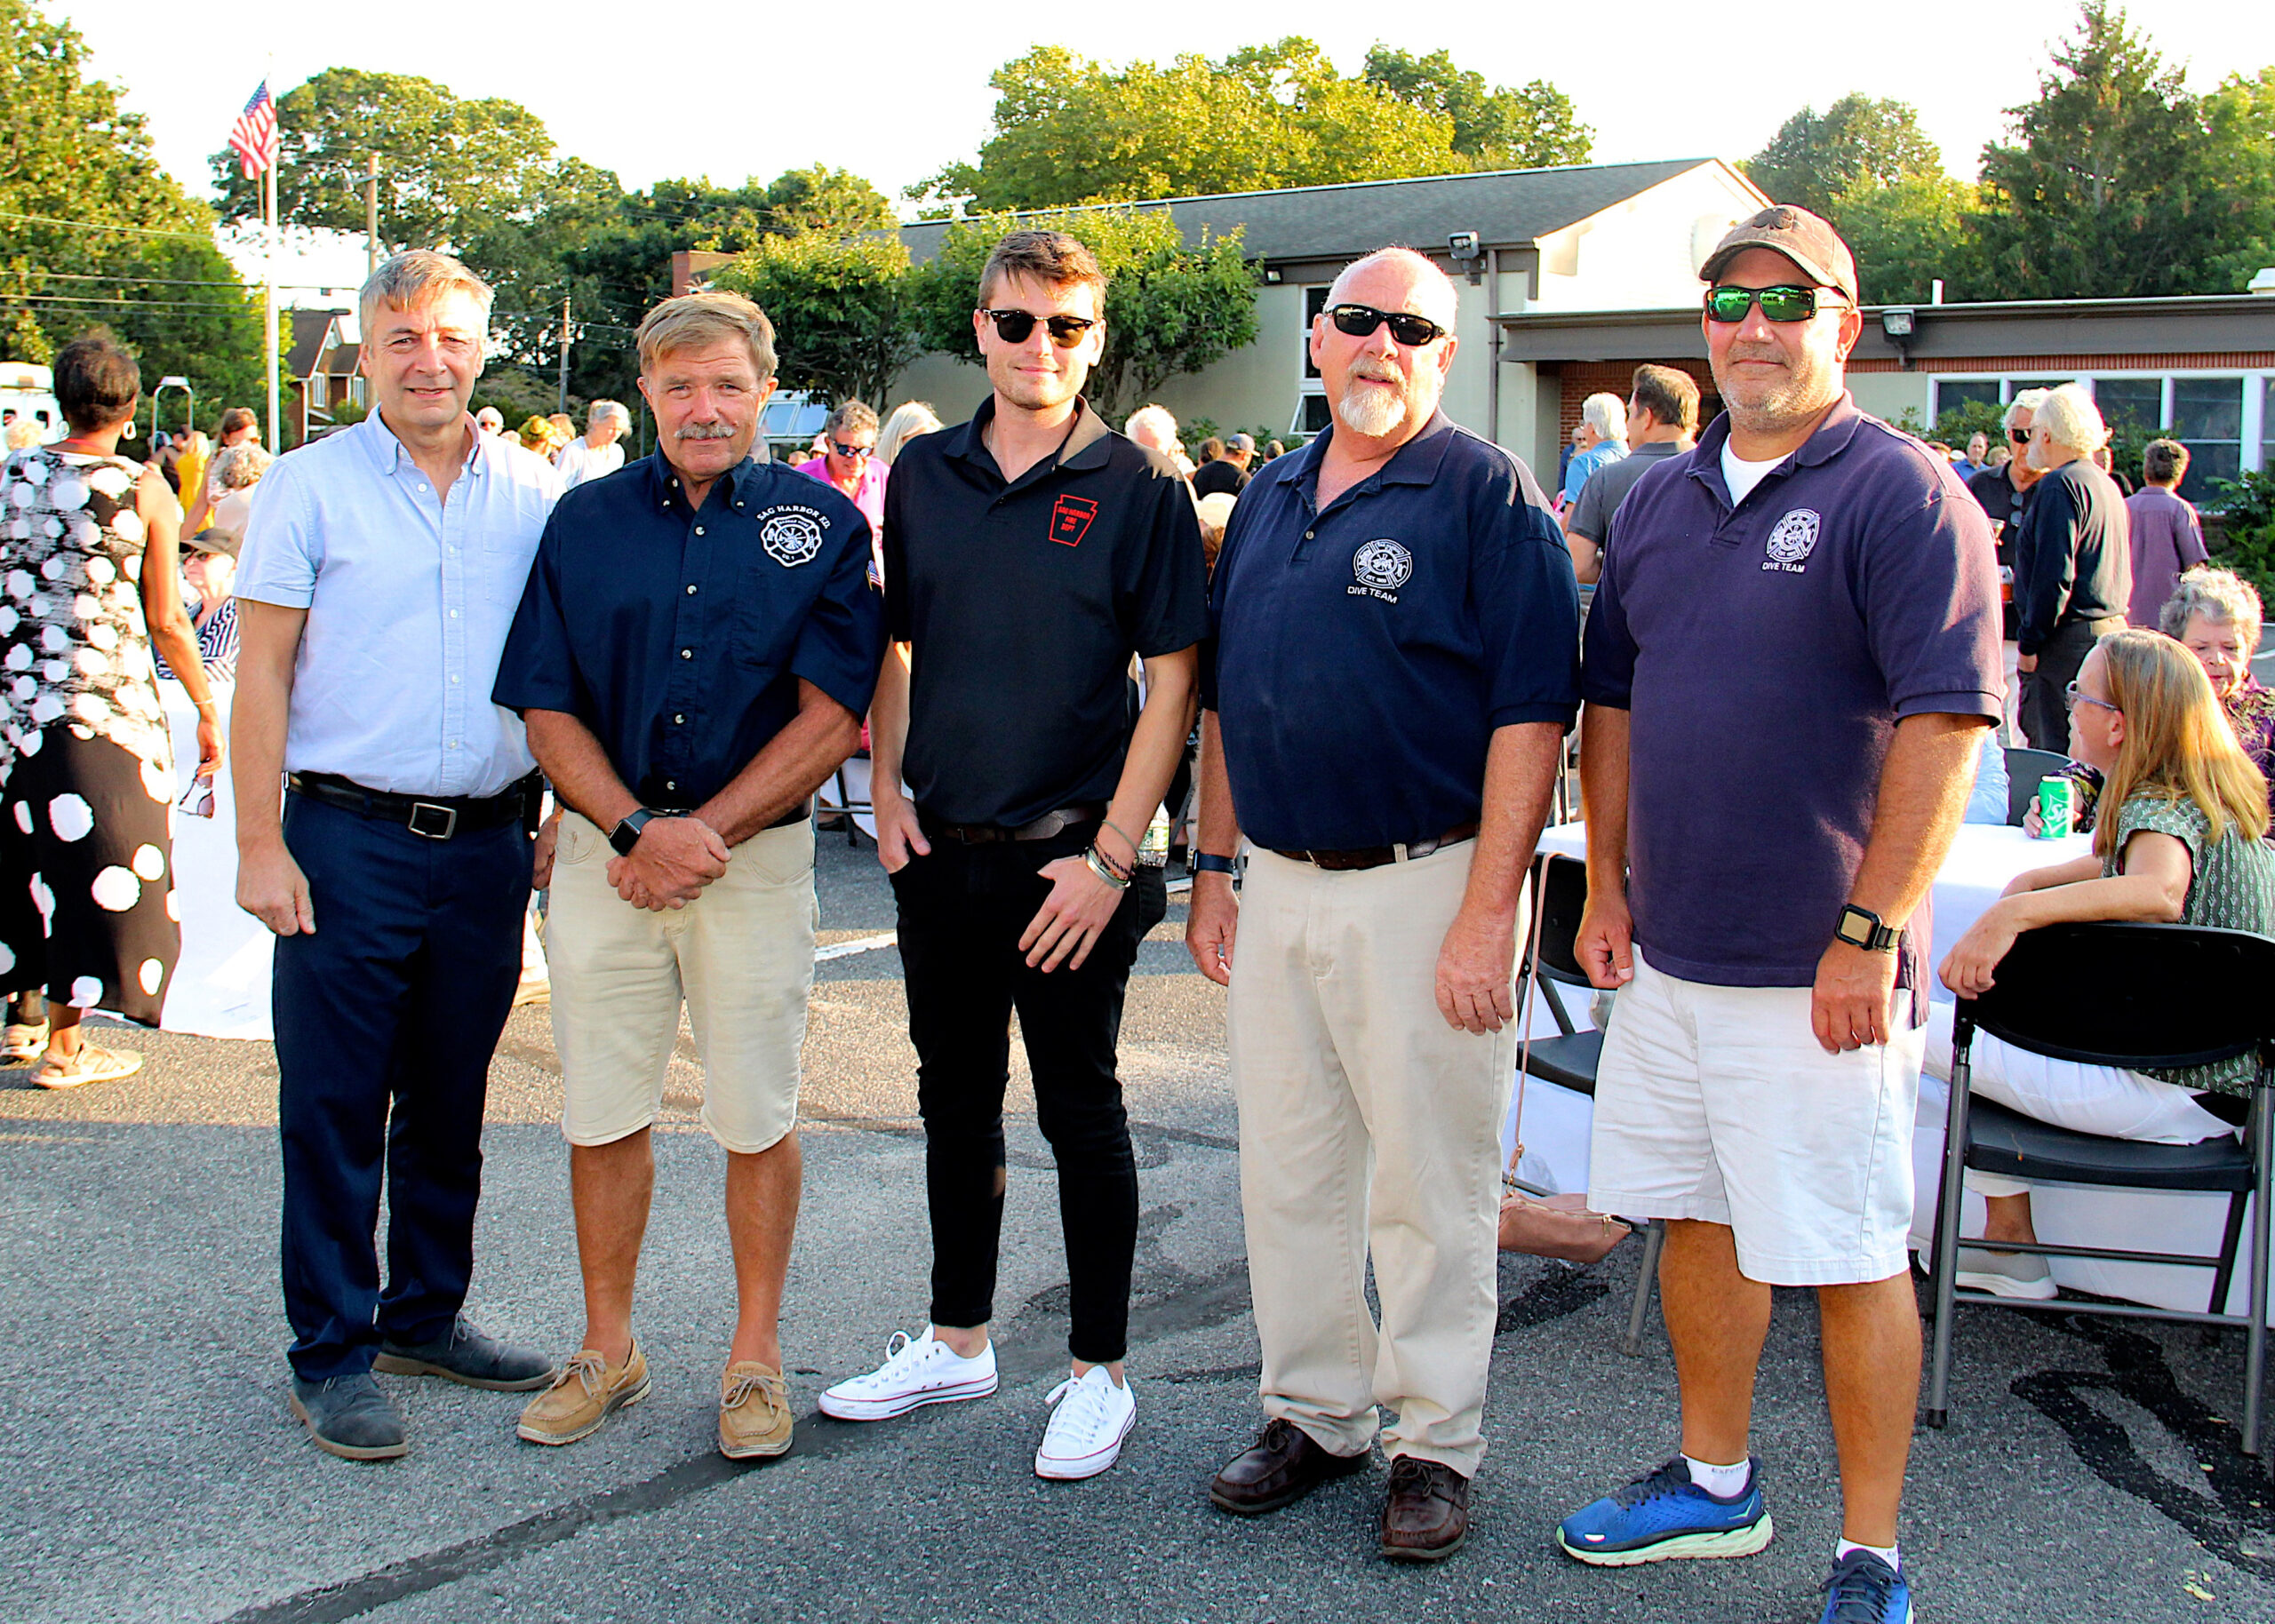 The Sag Harbor Partnership and the Sag Harbor Fire Department hosted 